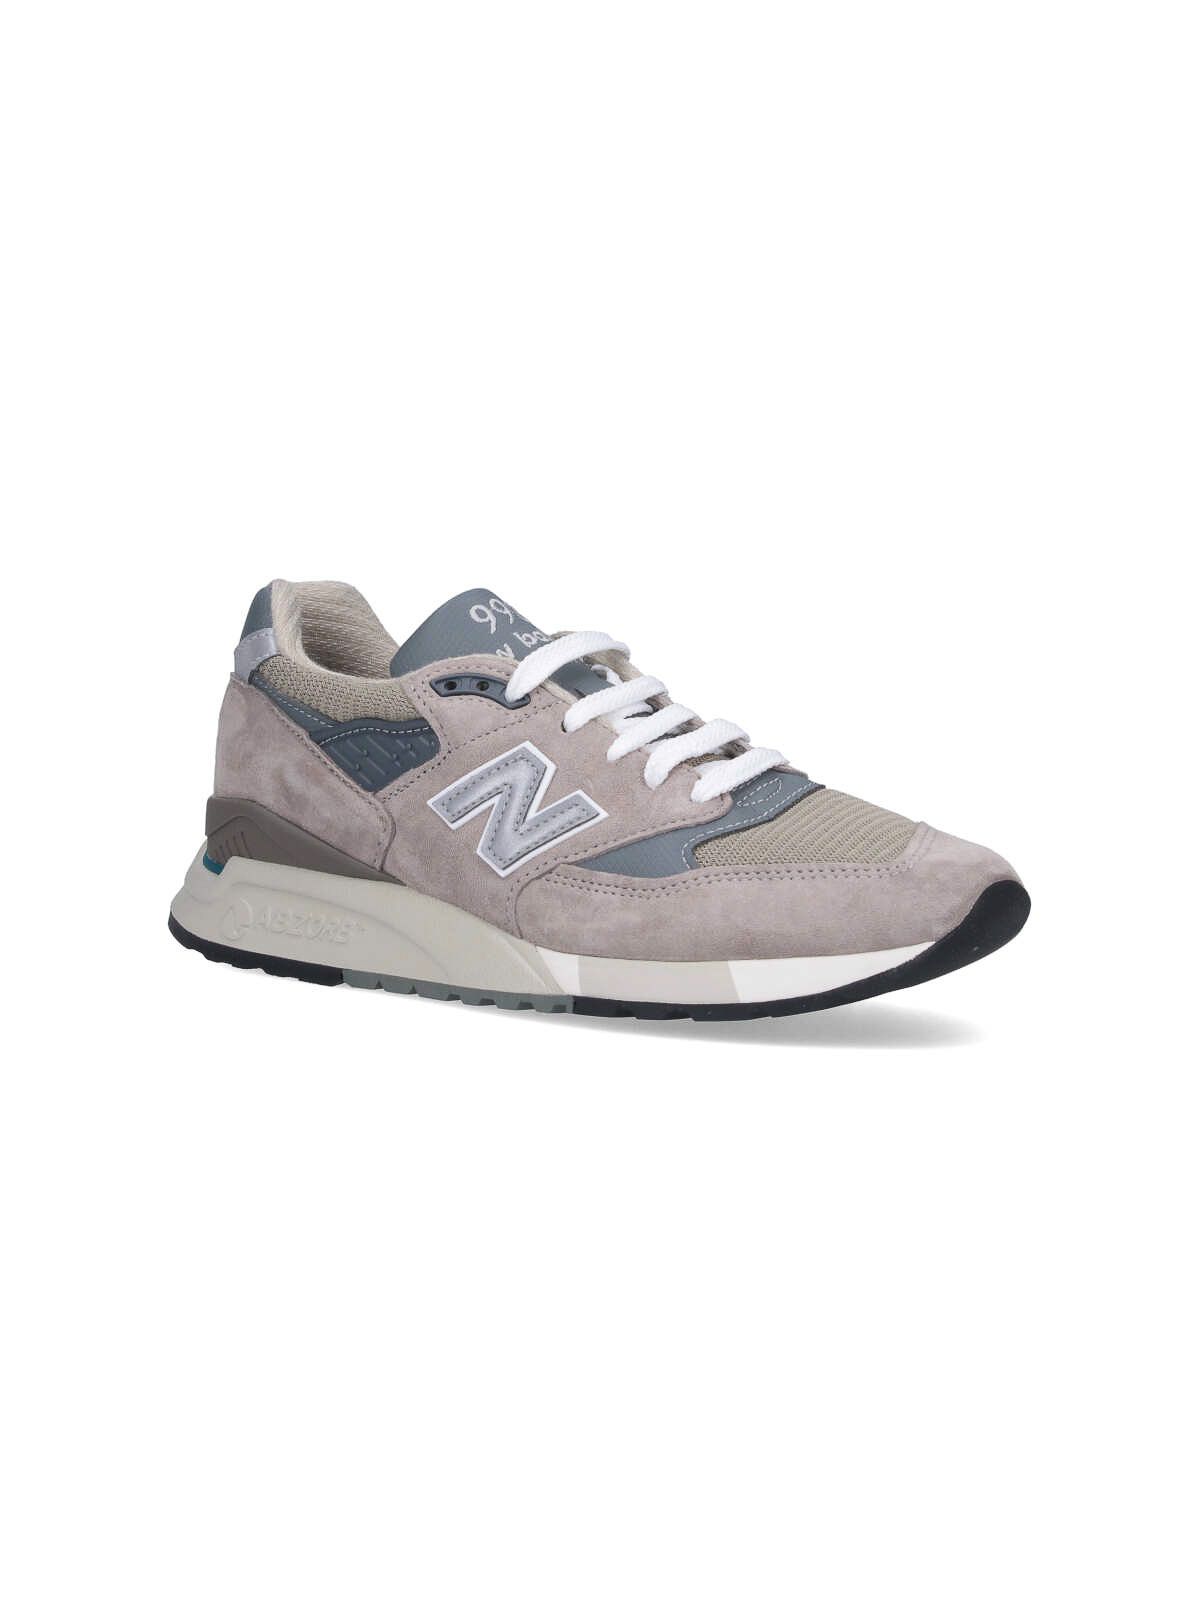 New Balance 9060 - Driftwood / Stone Pink – Sneaky Lace™, Canada's Online  Sneaker Store